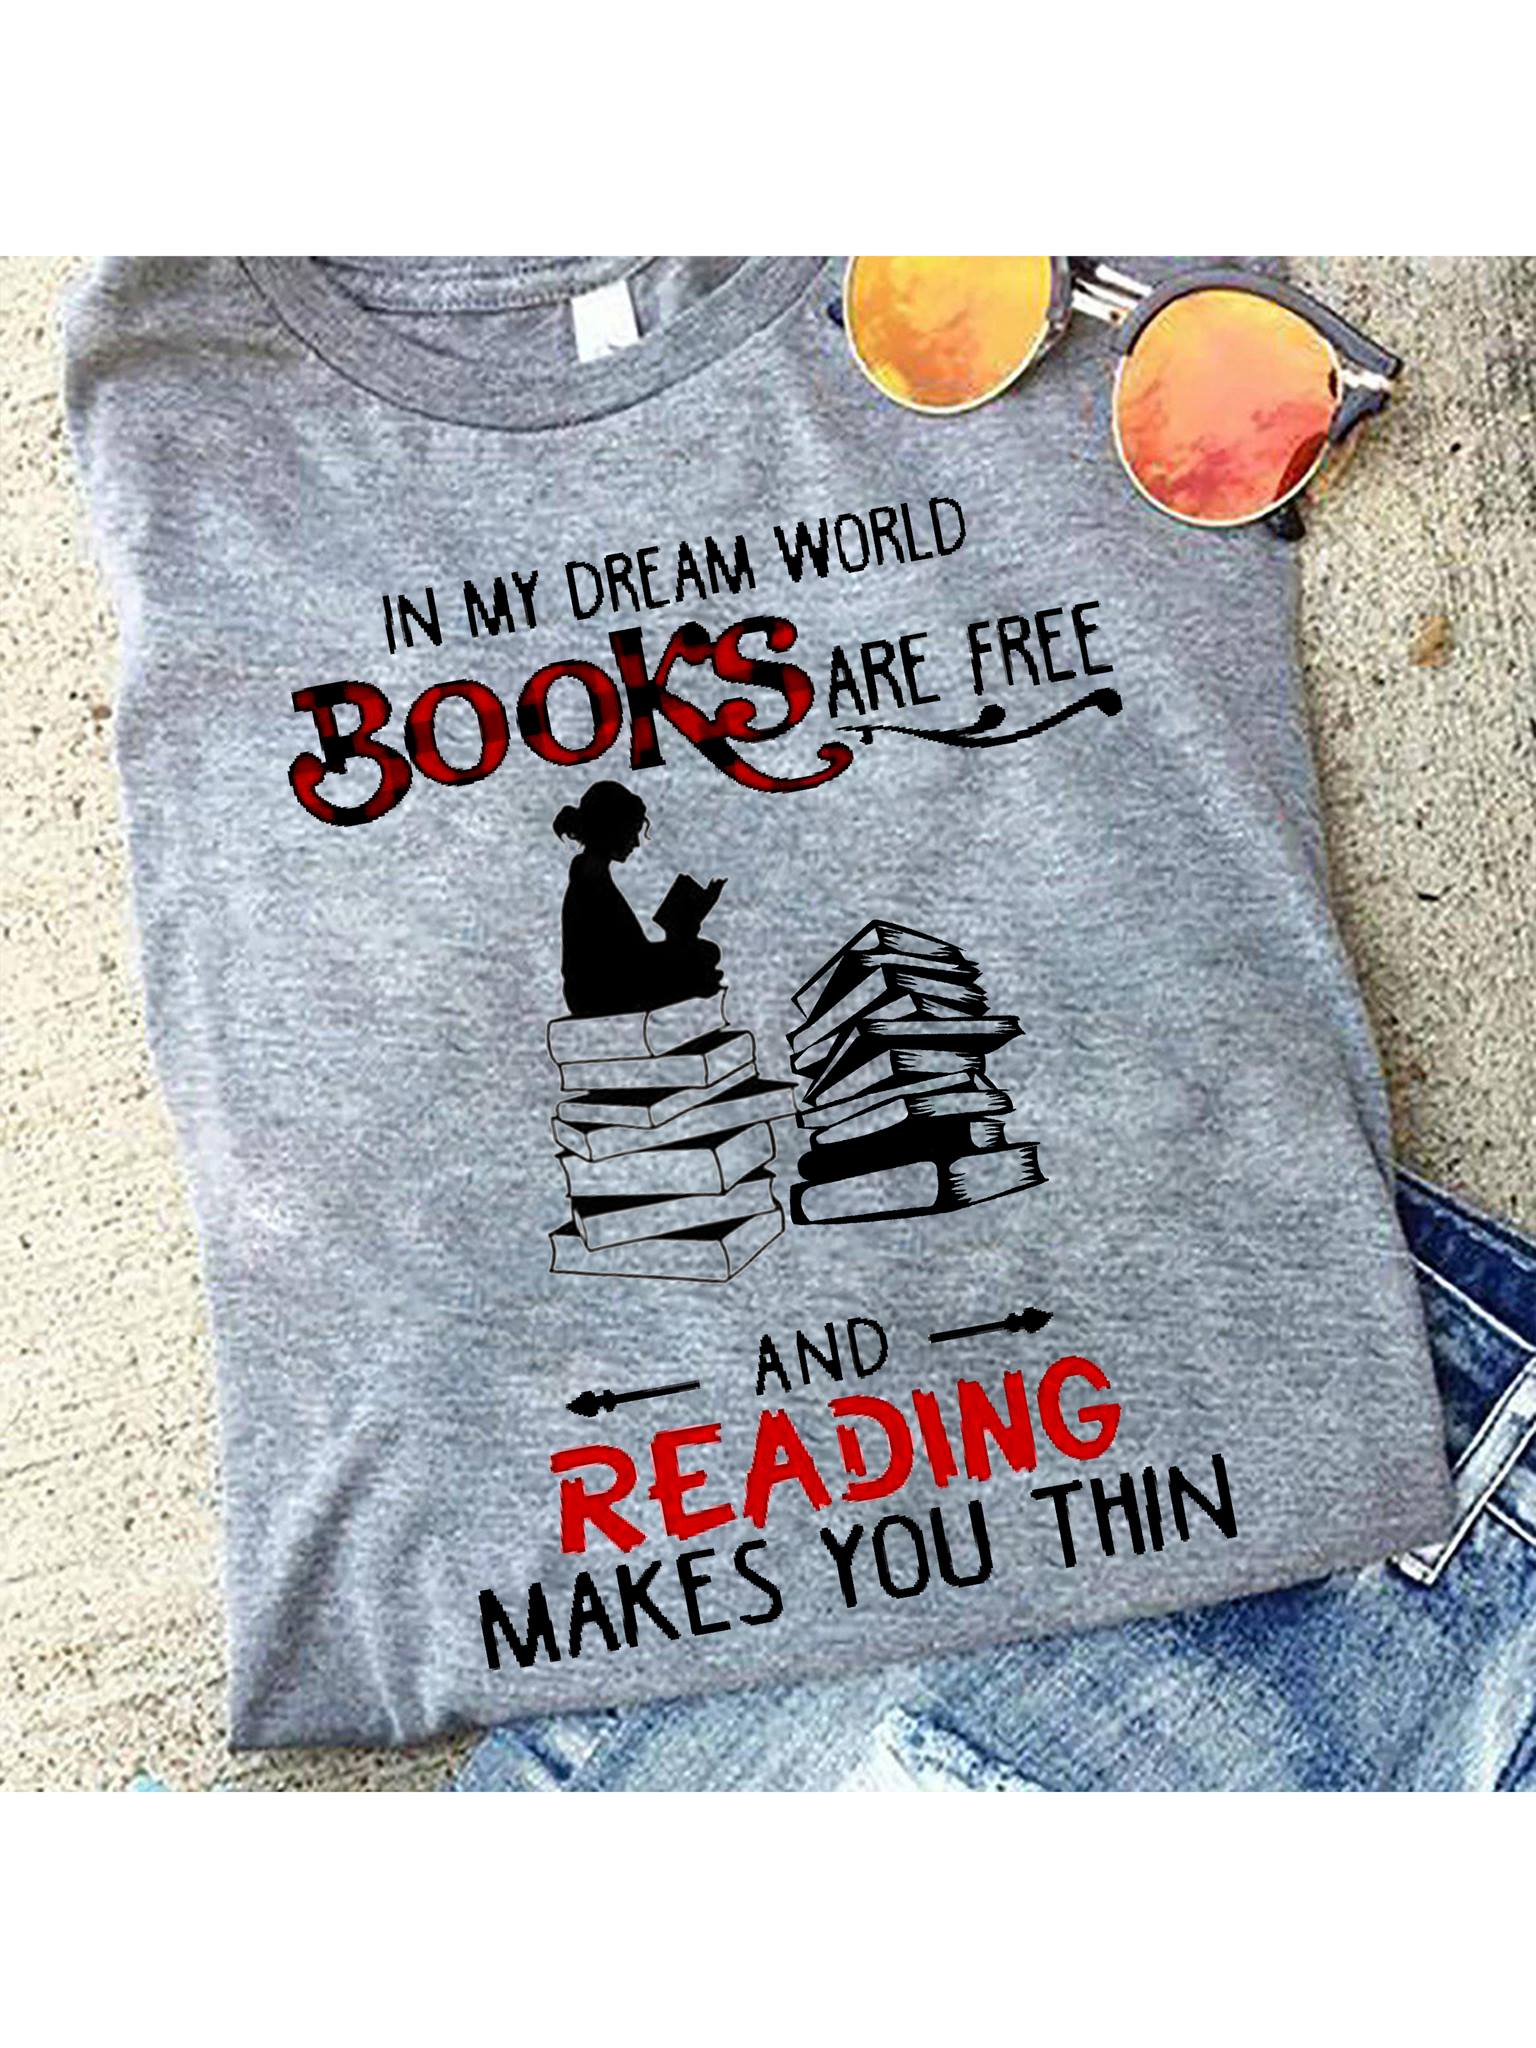 In My Dream World Books Are Free And Reading Makes You Thin Shirt Hoodie Sweatshirt Fridaystuff